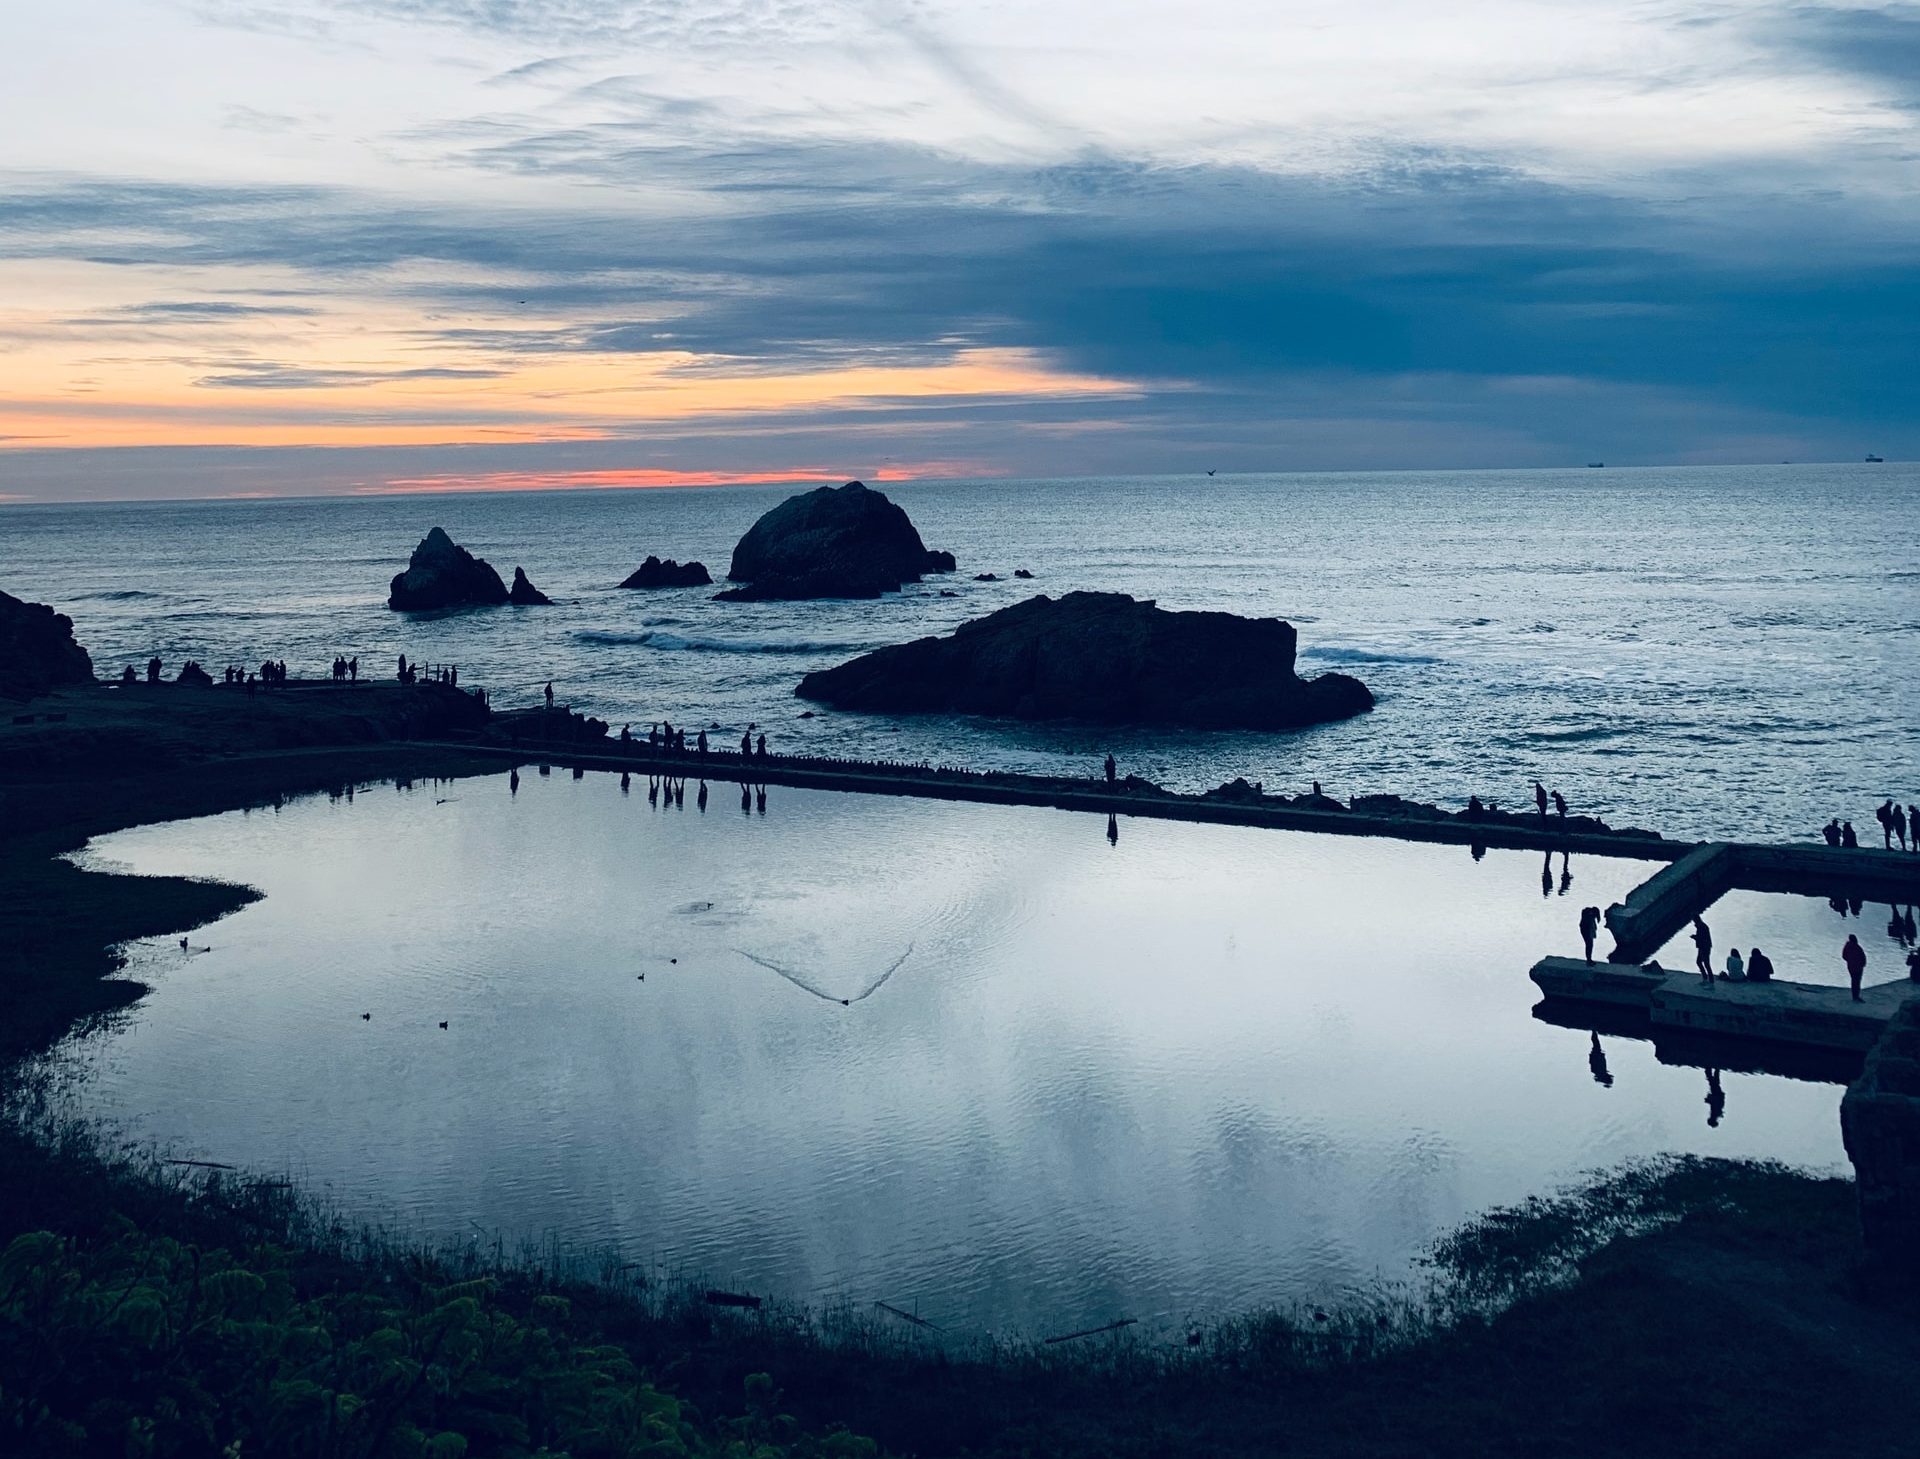 Sutro Baths at Lands End at Sunset